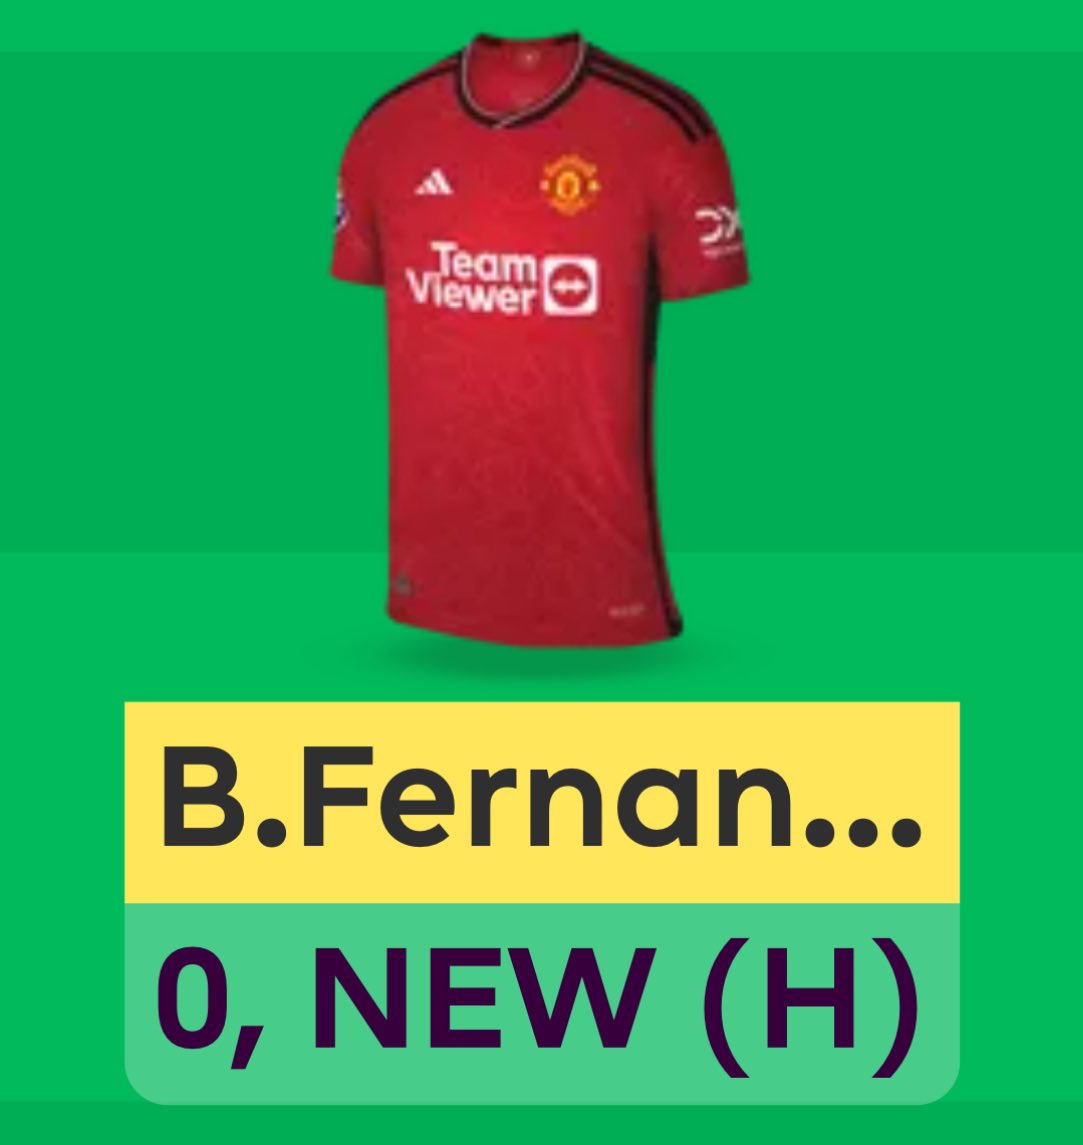 A proper waste on wildcard 💩

Blank in GW35
Injured in GW36
Injured in 1st game of GW37
Likely out for the 2nd game of GW37